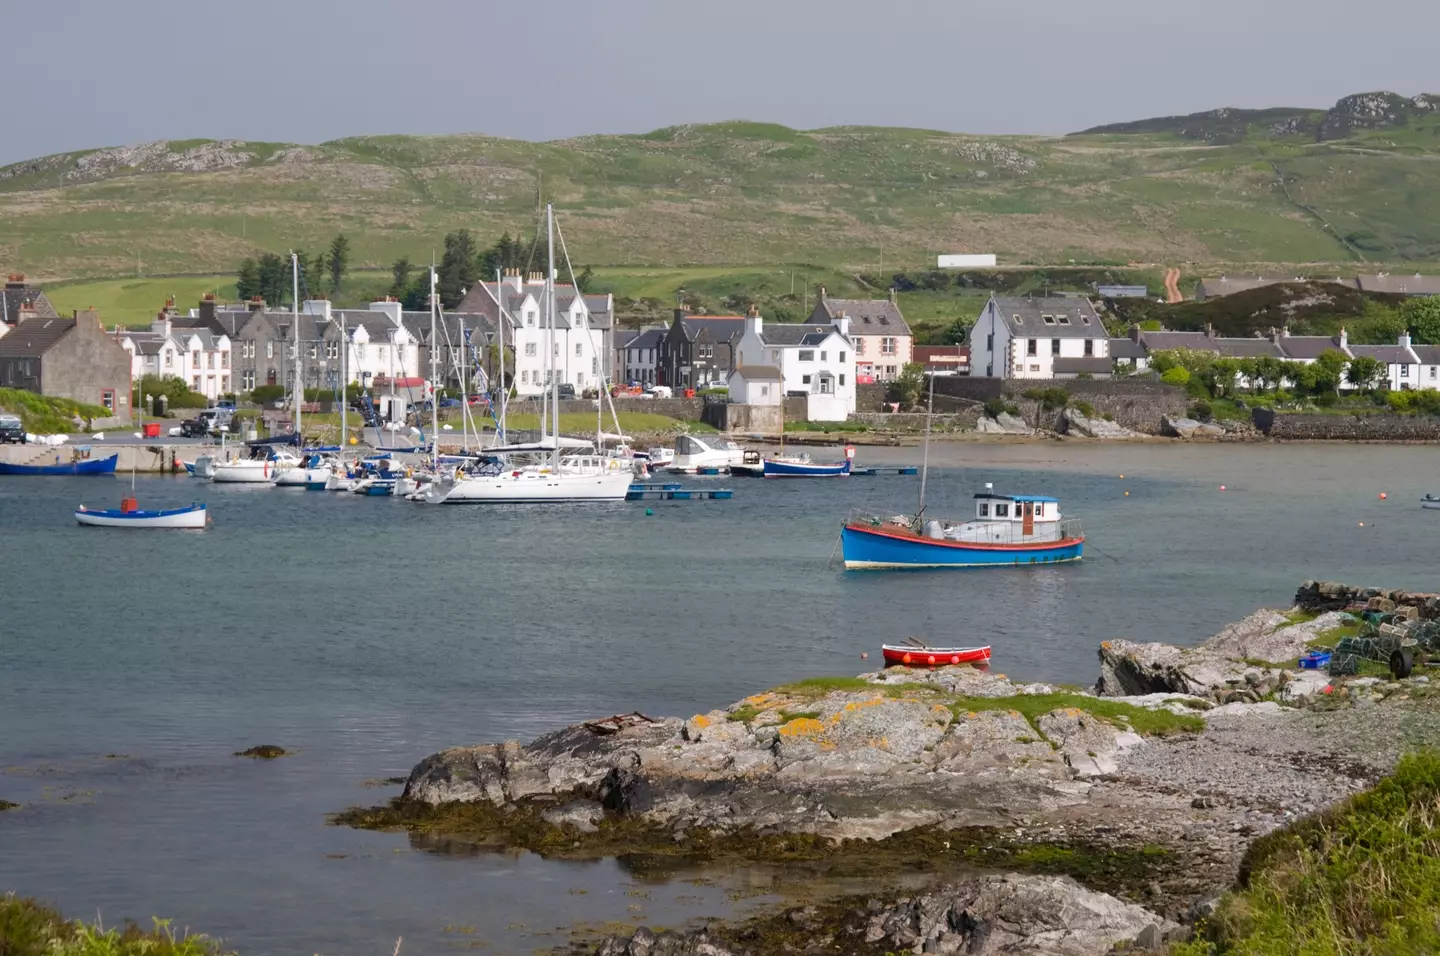 The shark was caught off the picturesque isle of Islay in the Inner Hebrides (